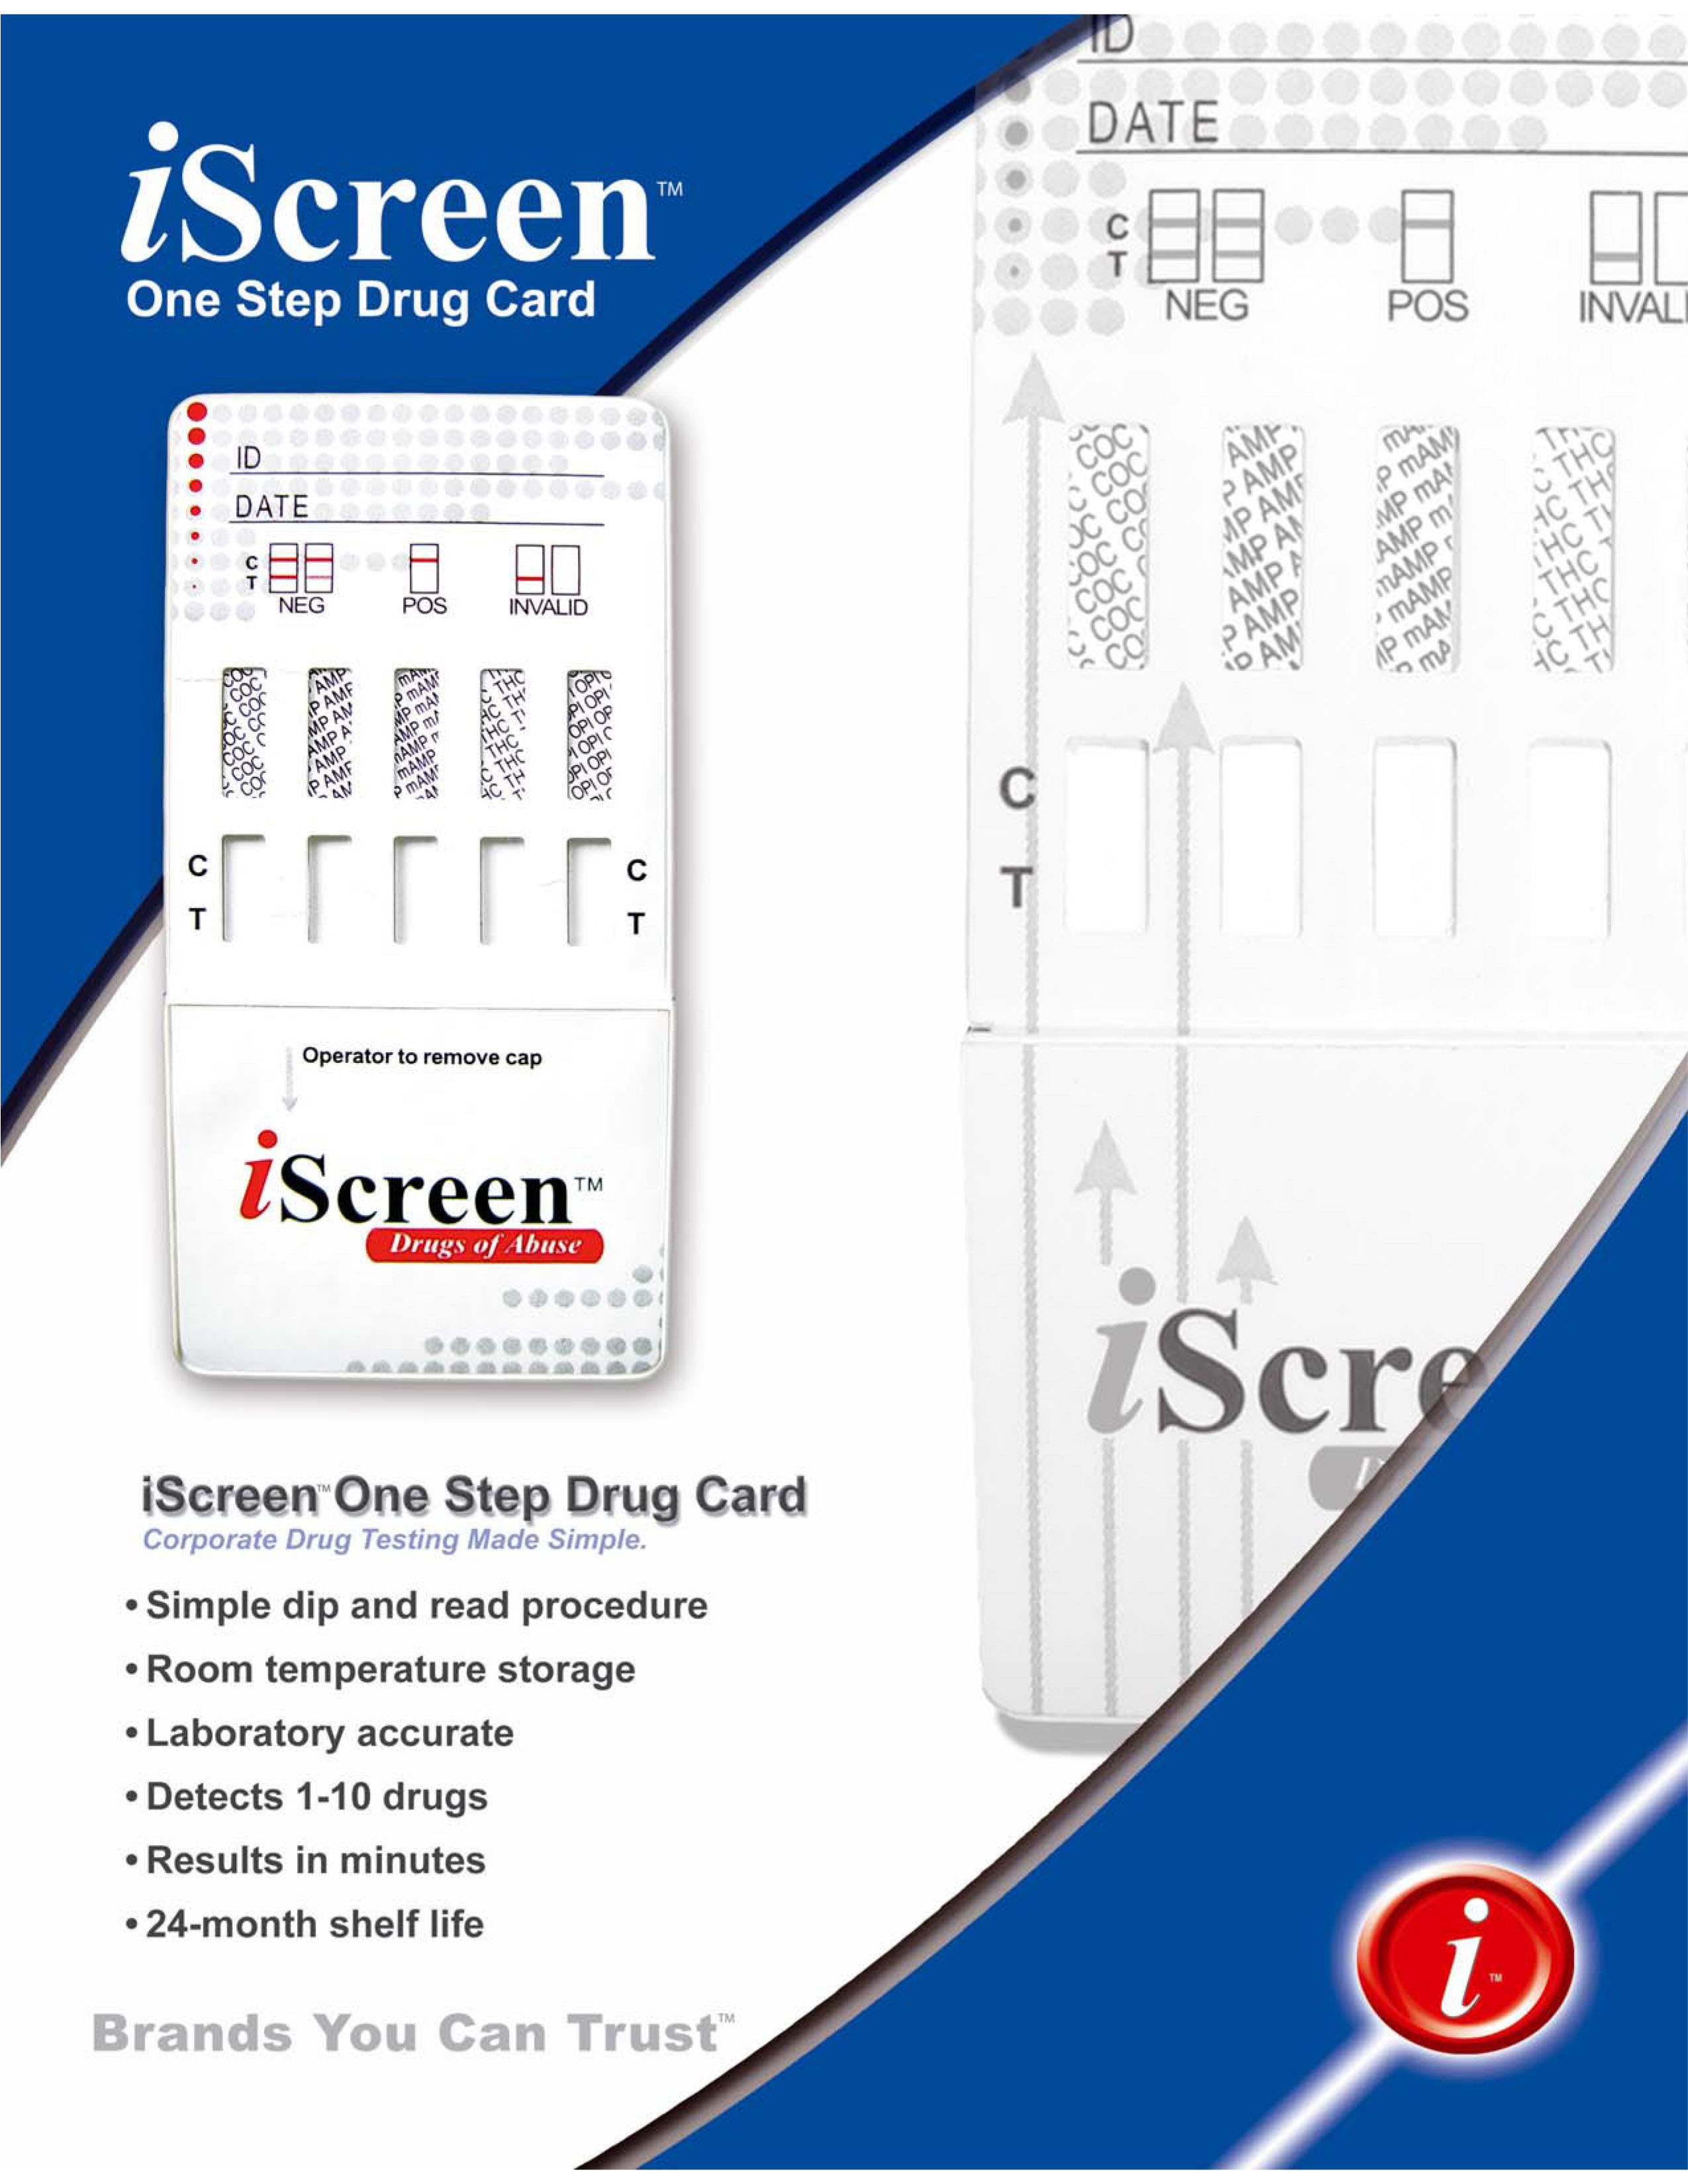 iScreen One Step Drug Card Product Specs (Page 1)